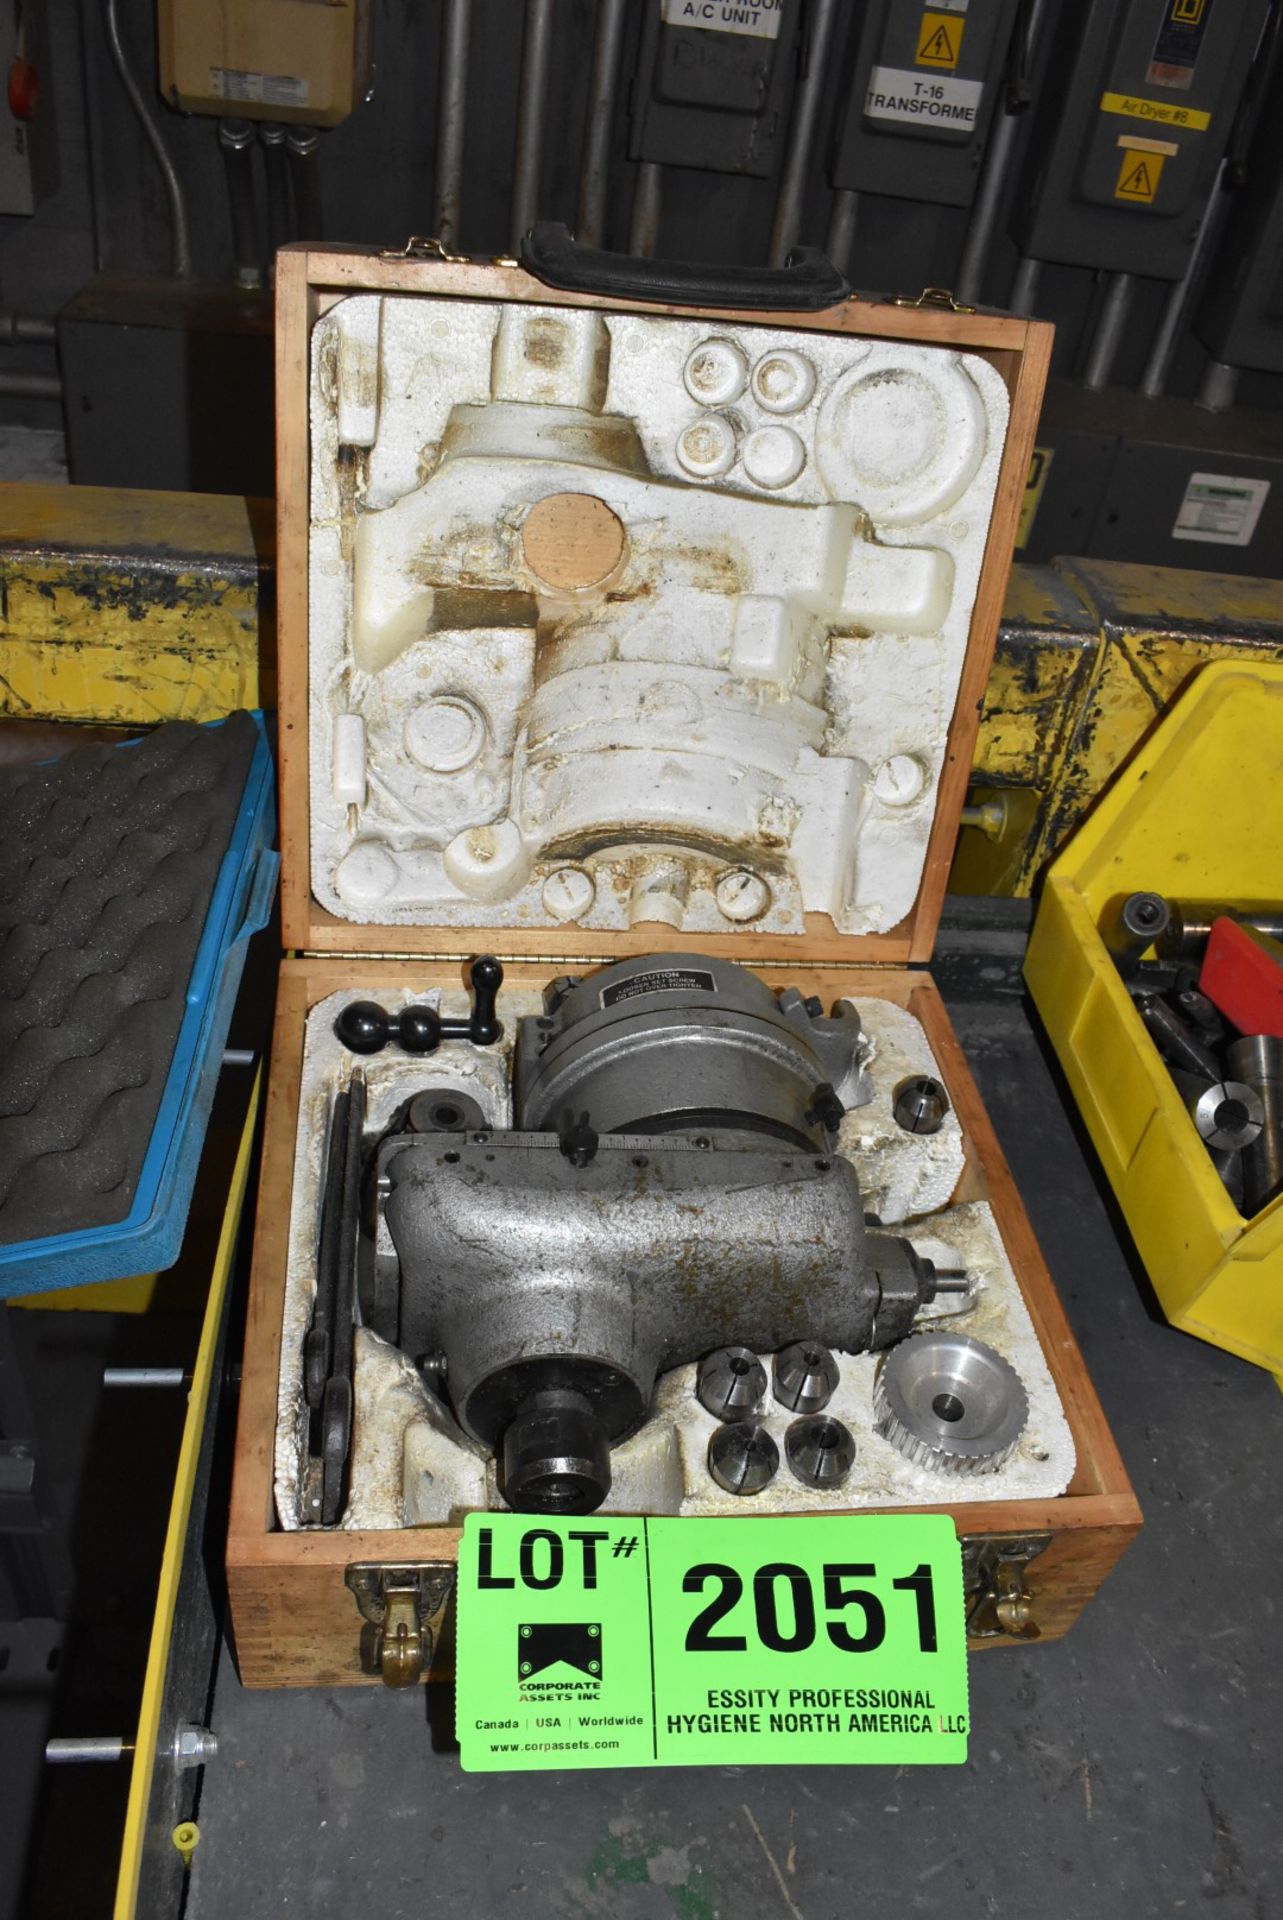 VOLSTRO OFFSET HEAD WITH COLLETS, S/N N/A [RIGGING FEES FOR LOT #2051 - $25 USD PLUS APPLICABLE